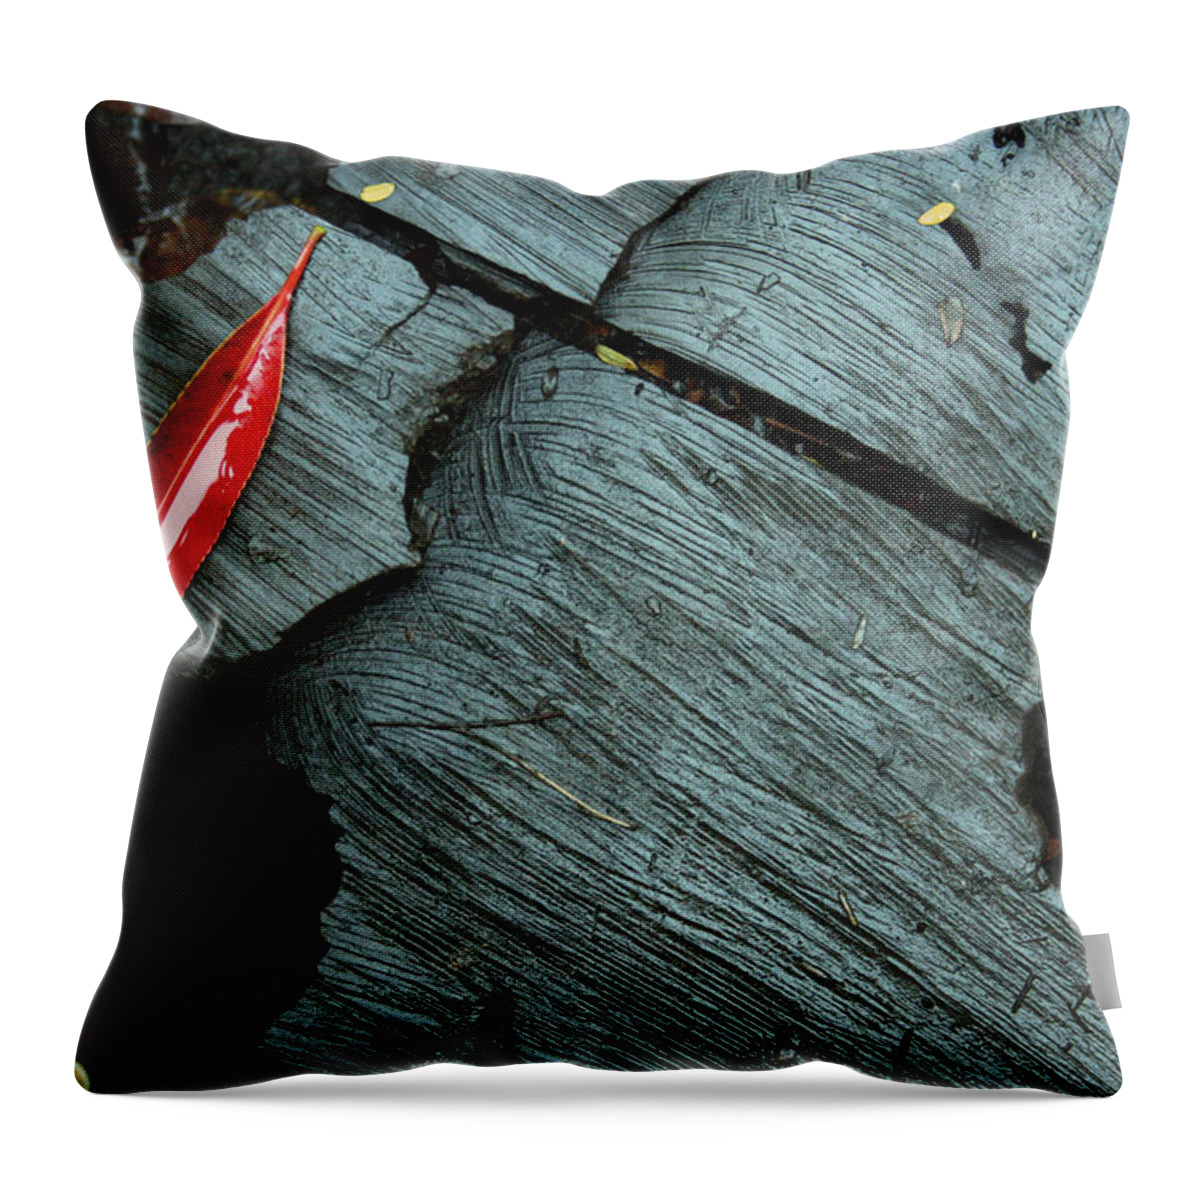 Fall Colors Throw Pillow featuring the photograph Red Leaf on Cut Wood by Jennifer Bright Burr